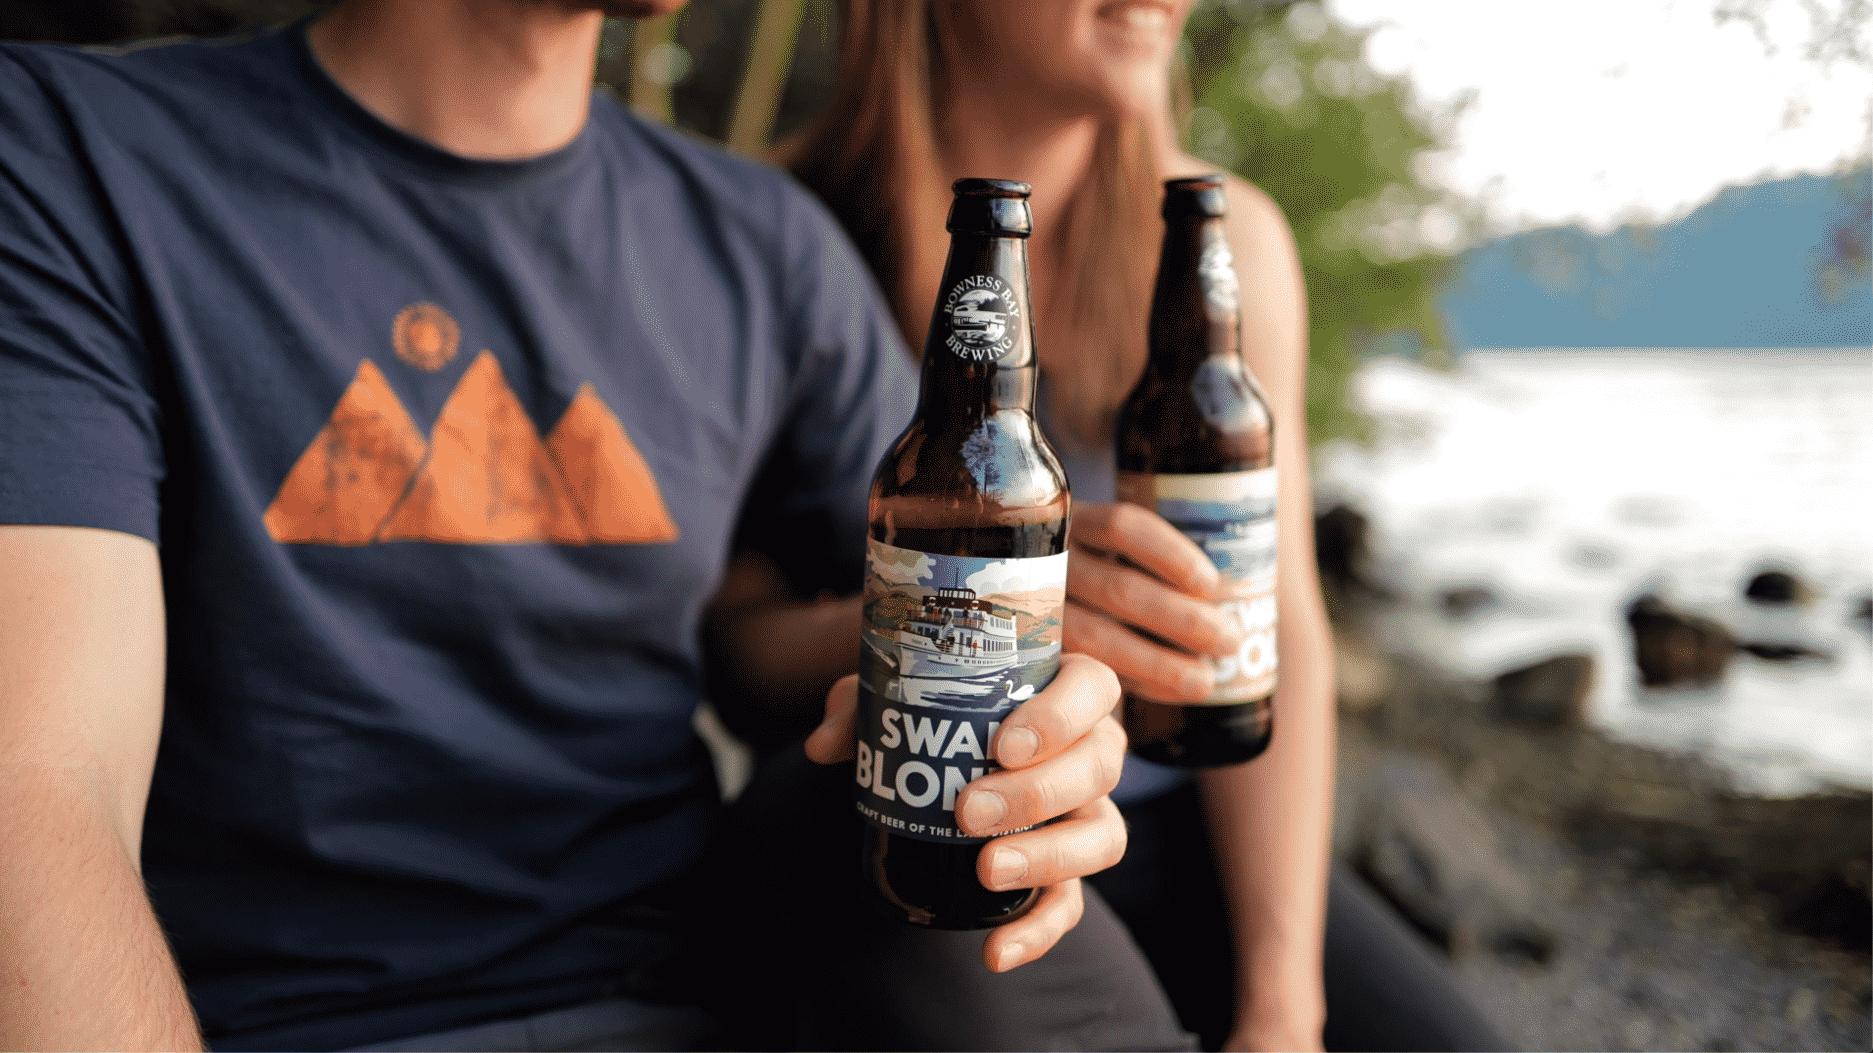 Brew-tiful Moments with Bowness Bay Brewing